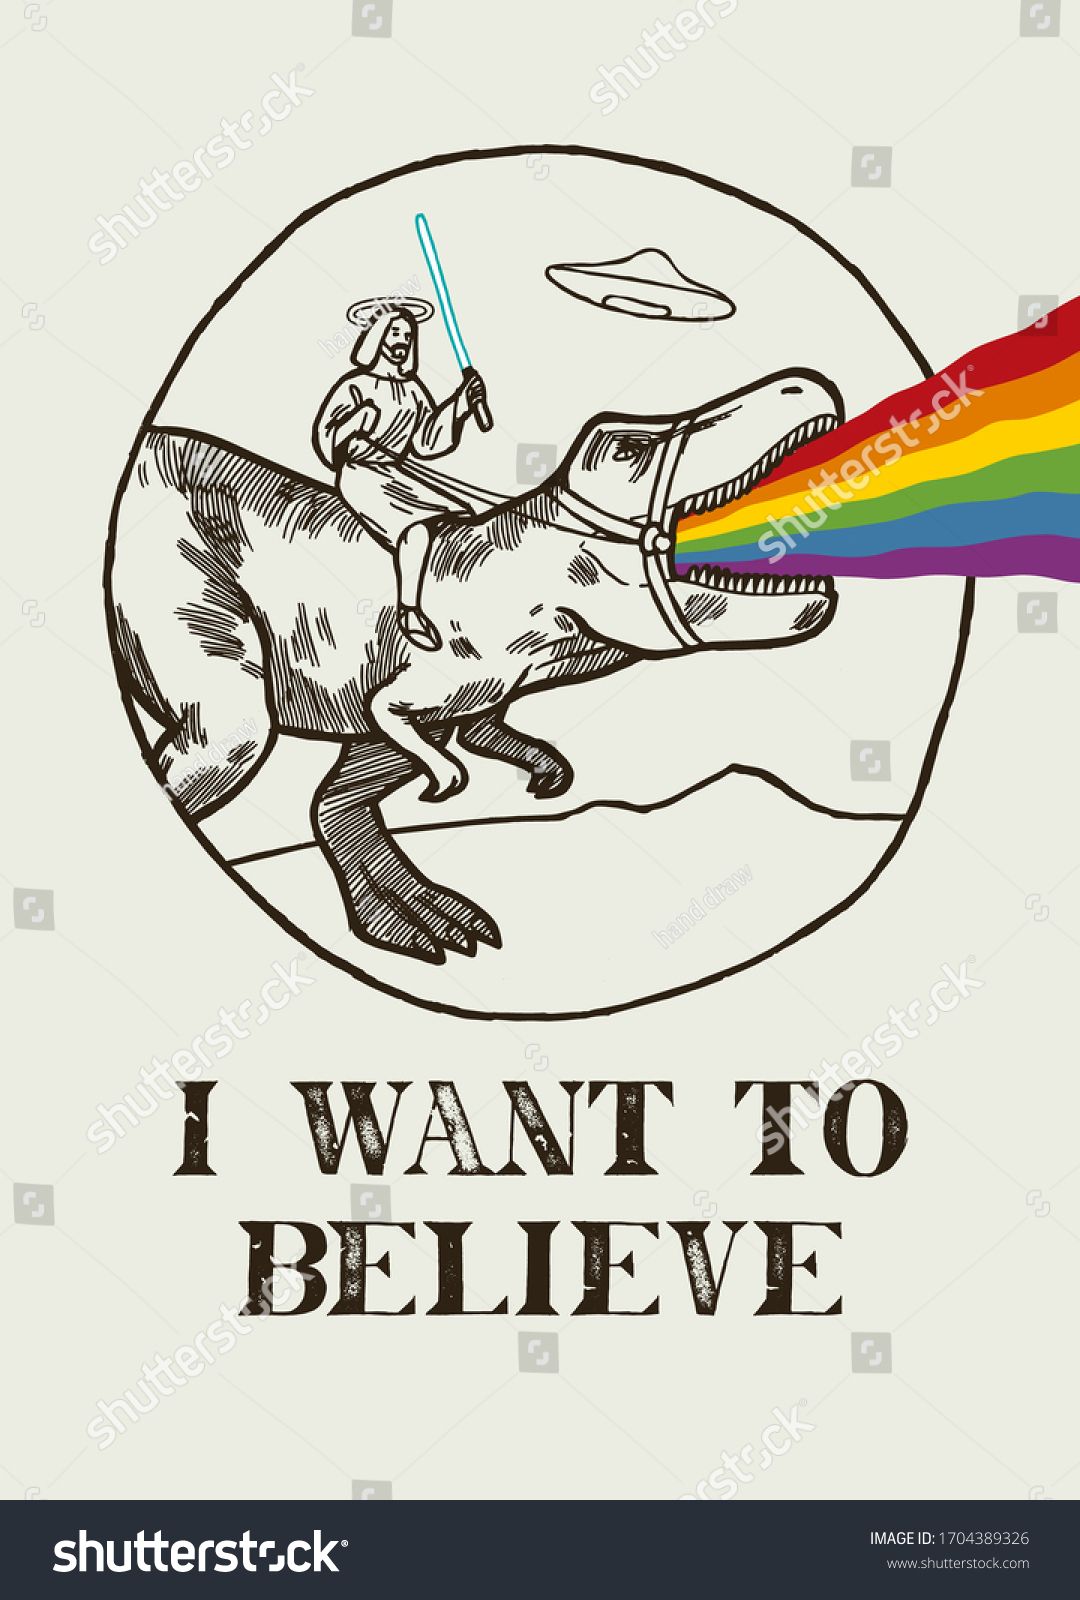 stock-vector-i-want-to-believe-jesus-riding-t-rex-dinosaur-is-puking-rainbow-ufo-saucer-flying...jpg